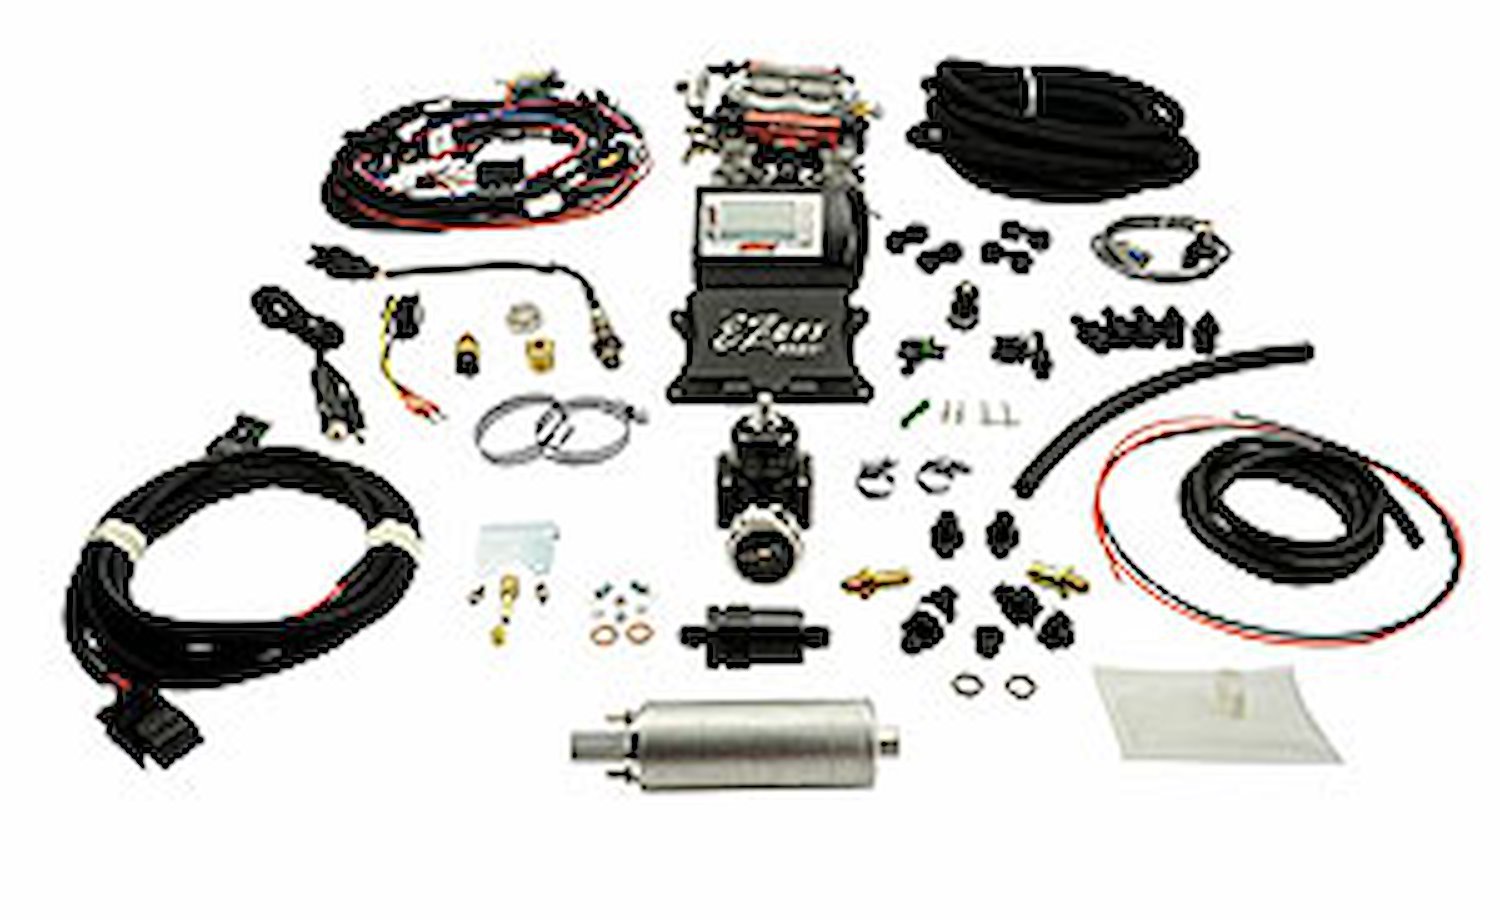 EZ-EFI Self-Tuning Fuel Injection System Master Kit with In-Tank Fuel Pump Kit